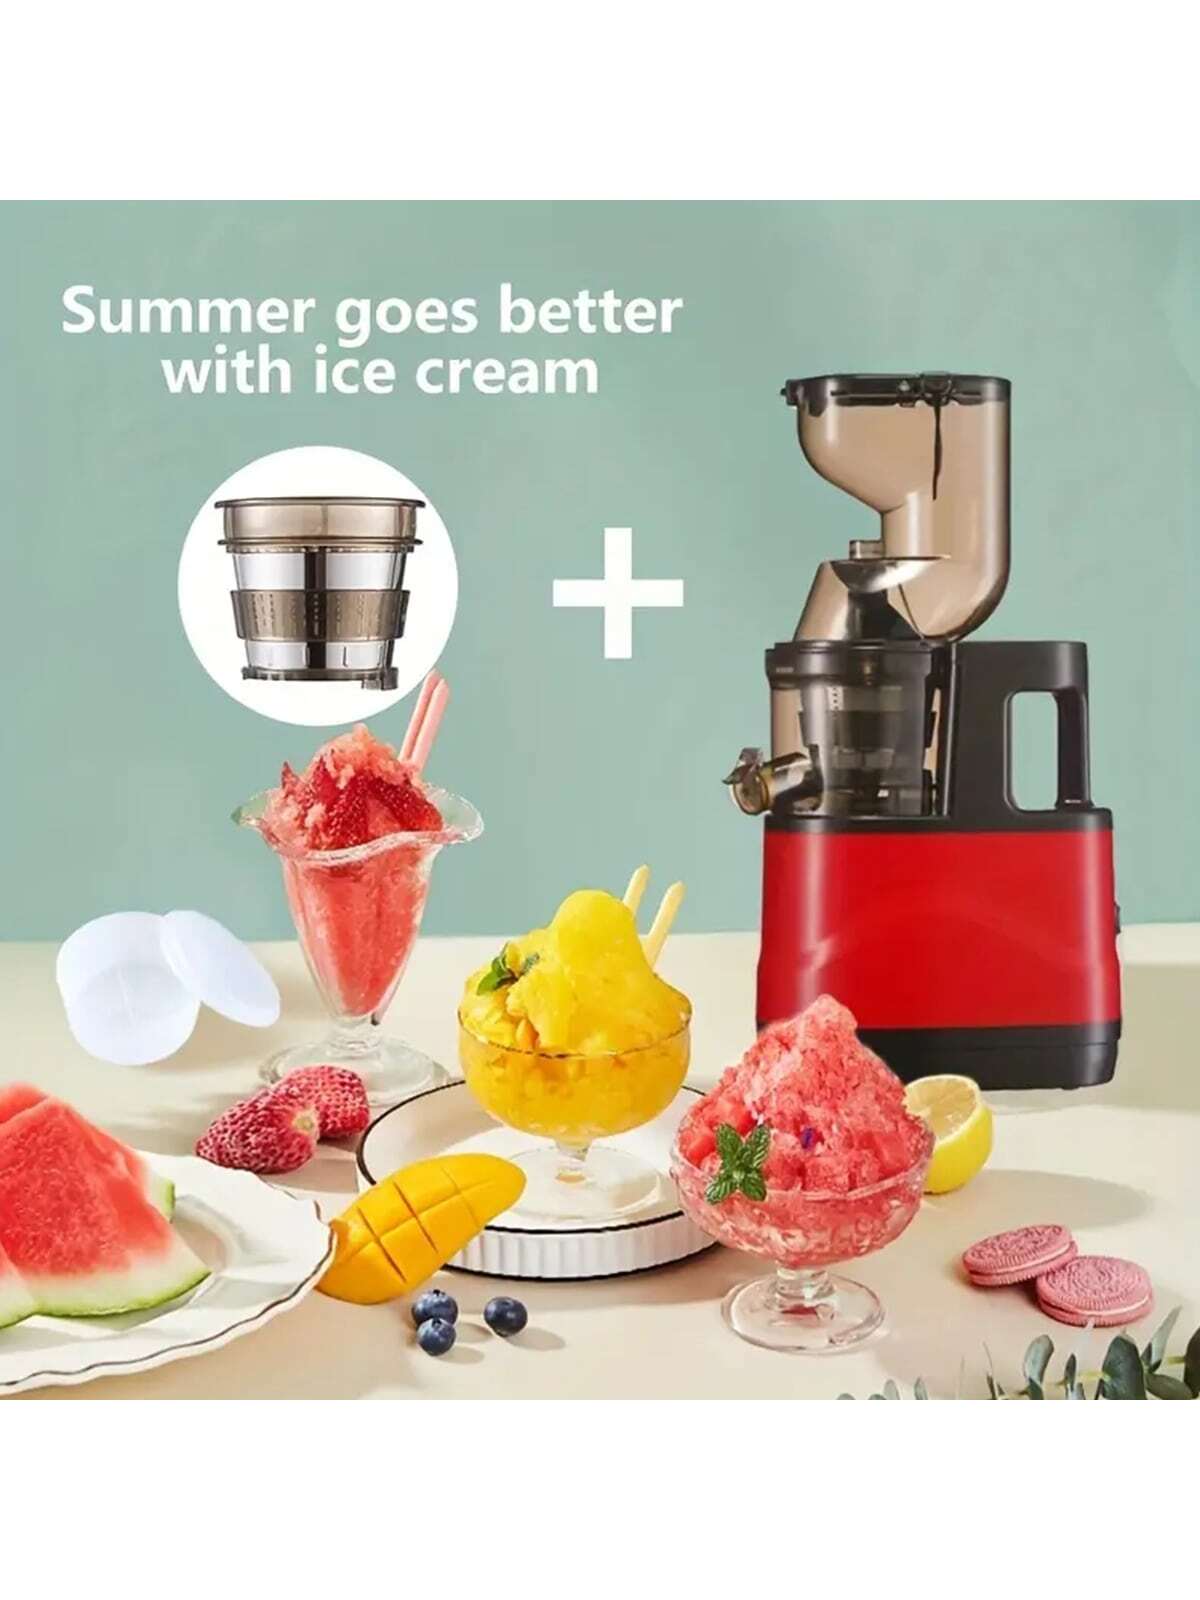 US/EU Plug Slow Juicer, Matte Black Juicer Machine, Slow Juicer Cold Press With 5.1in/14cm Wide Feed Chute, Vegetable And Fruit, Juicer Machine For Home Use With Brush, Easy To Clean, With Juice Cap Coarse Strainer, Tofu Press-Red-3